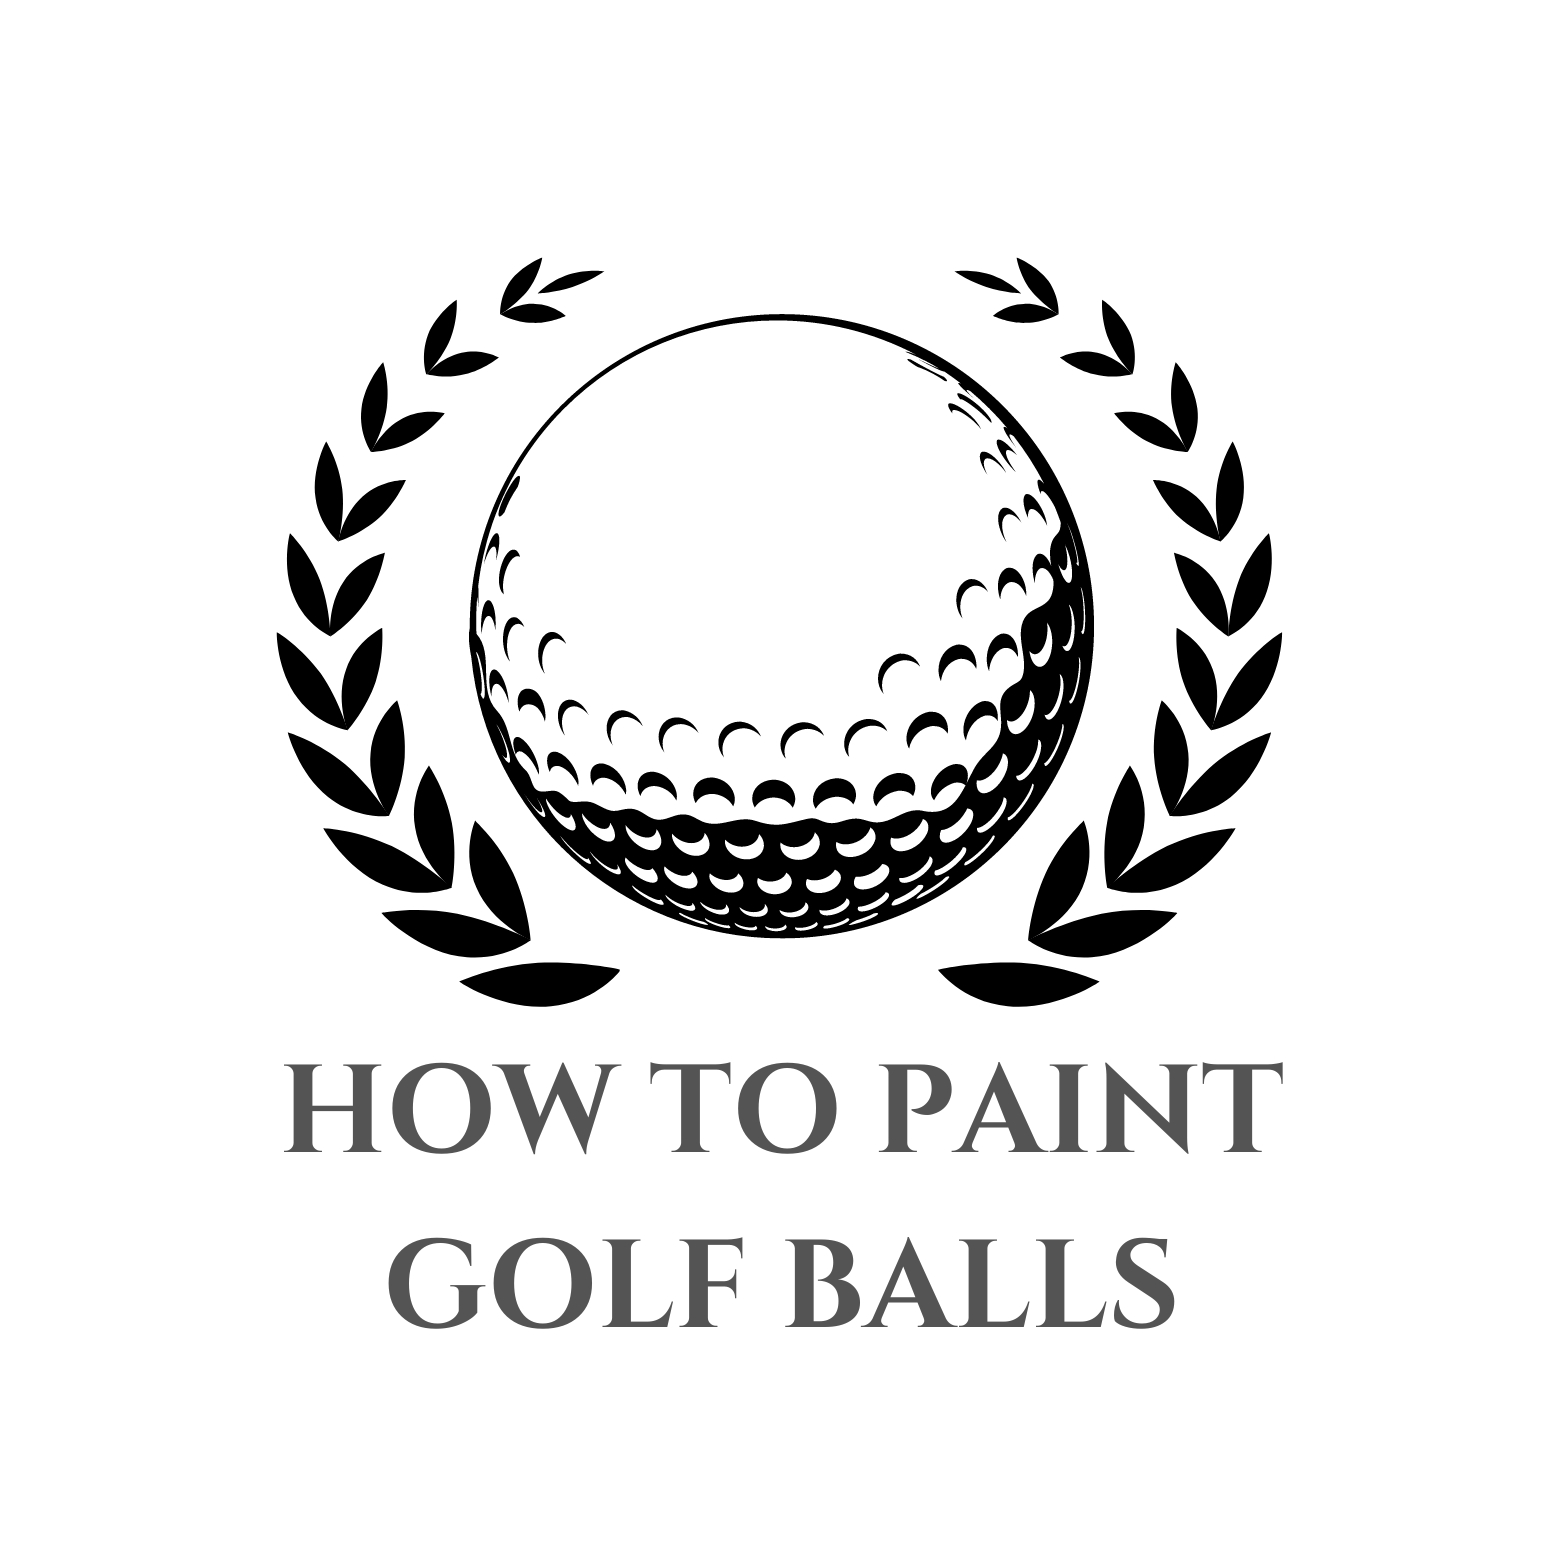 How to Paint Golf Balls